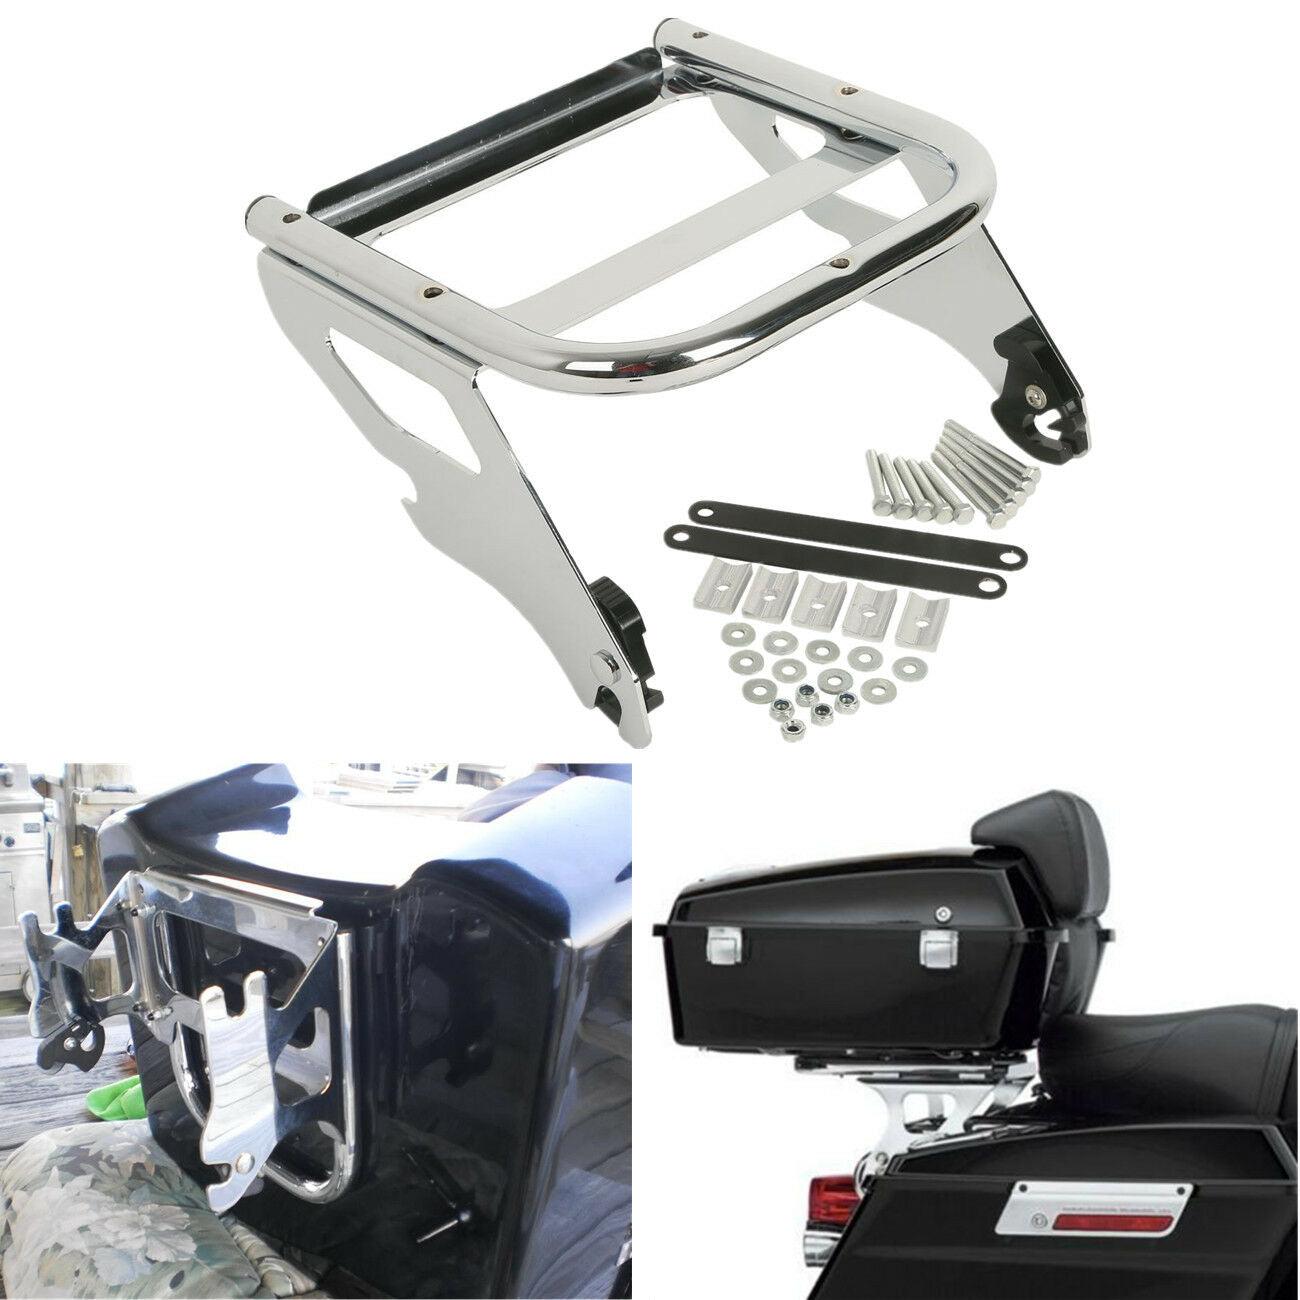 Chrome Solo Luggage Rack Mount Fit for Harley Tour Pak Touring Road Glide 97-08 - Moto Life Products